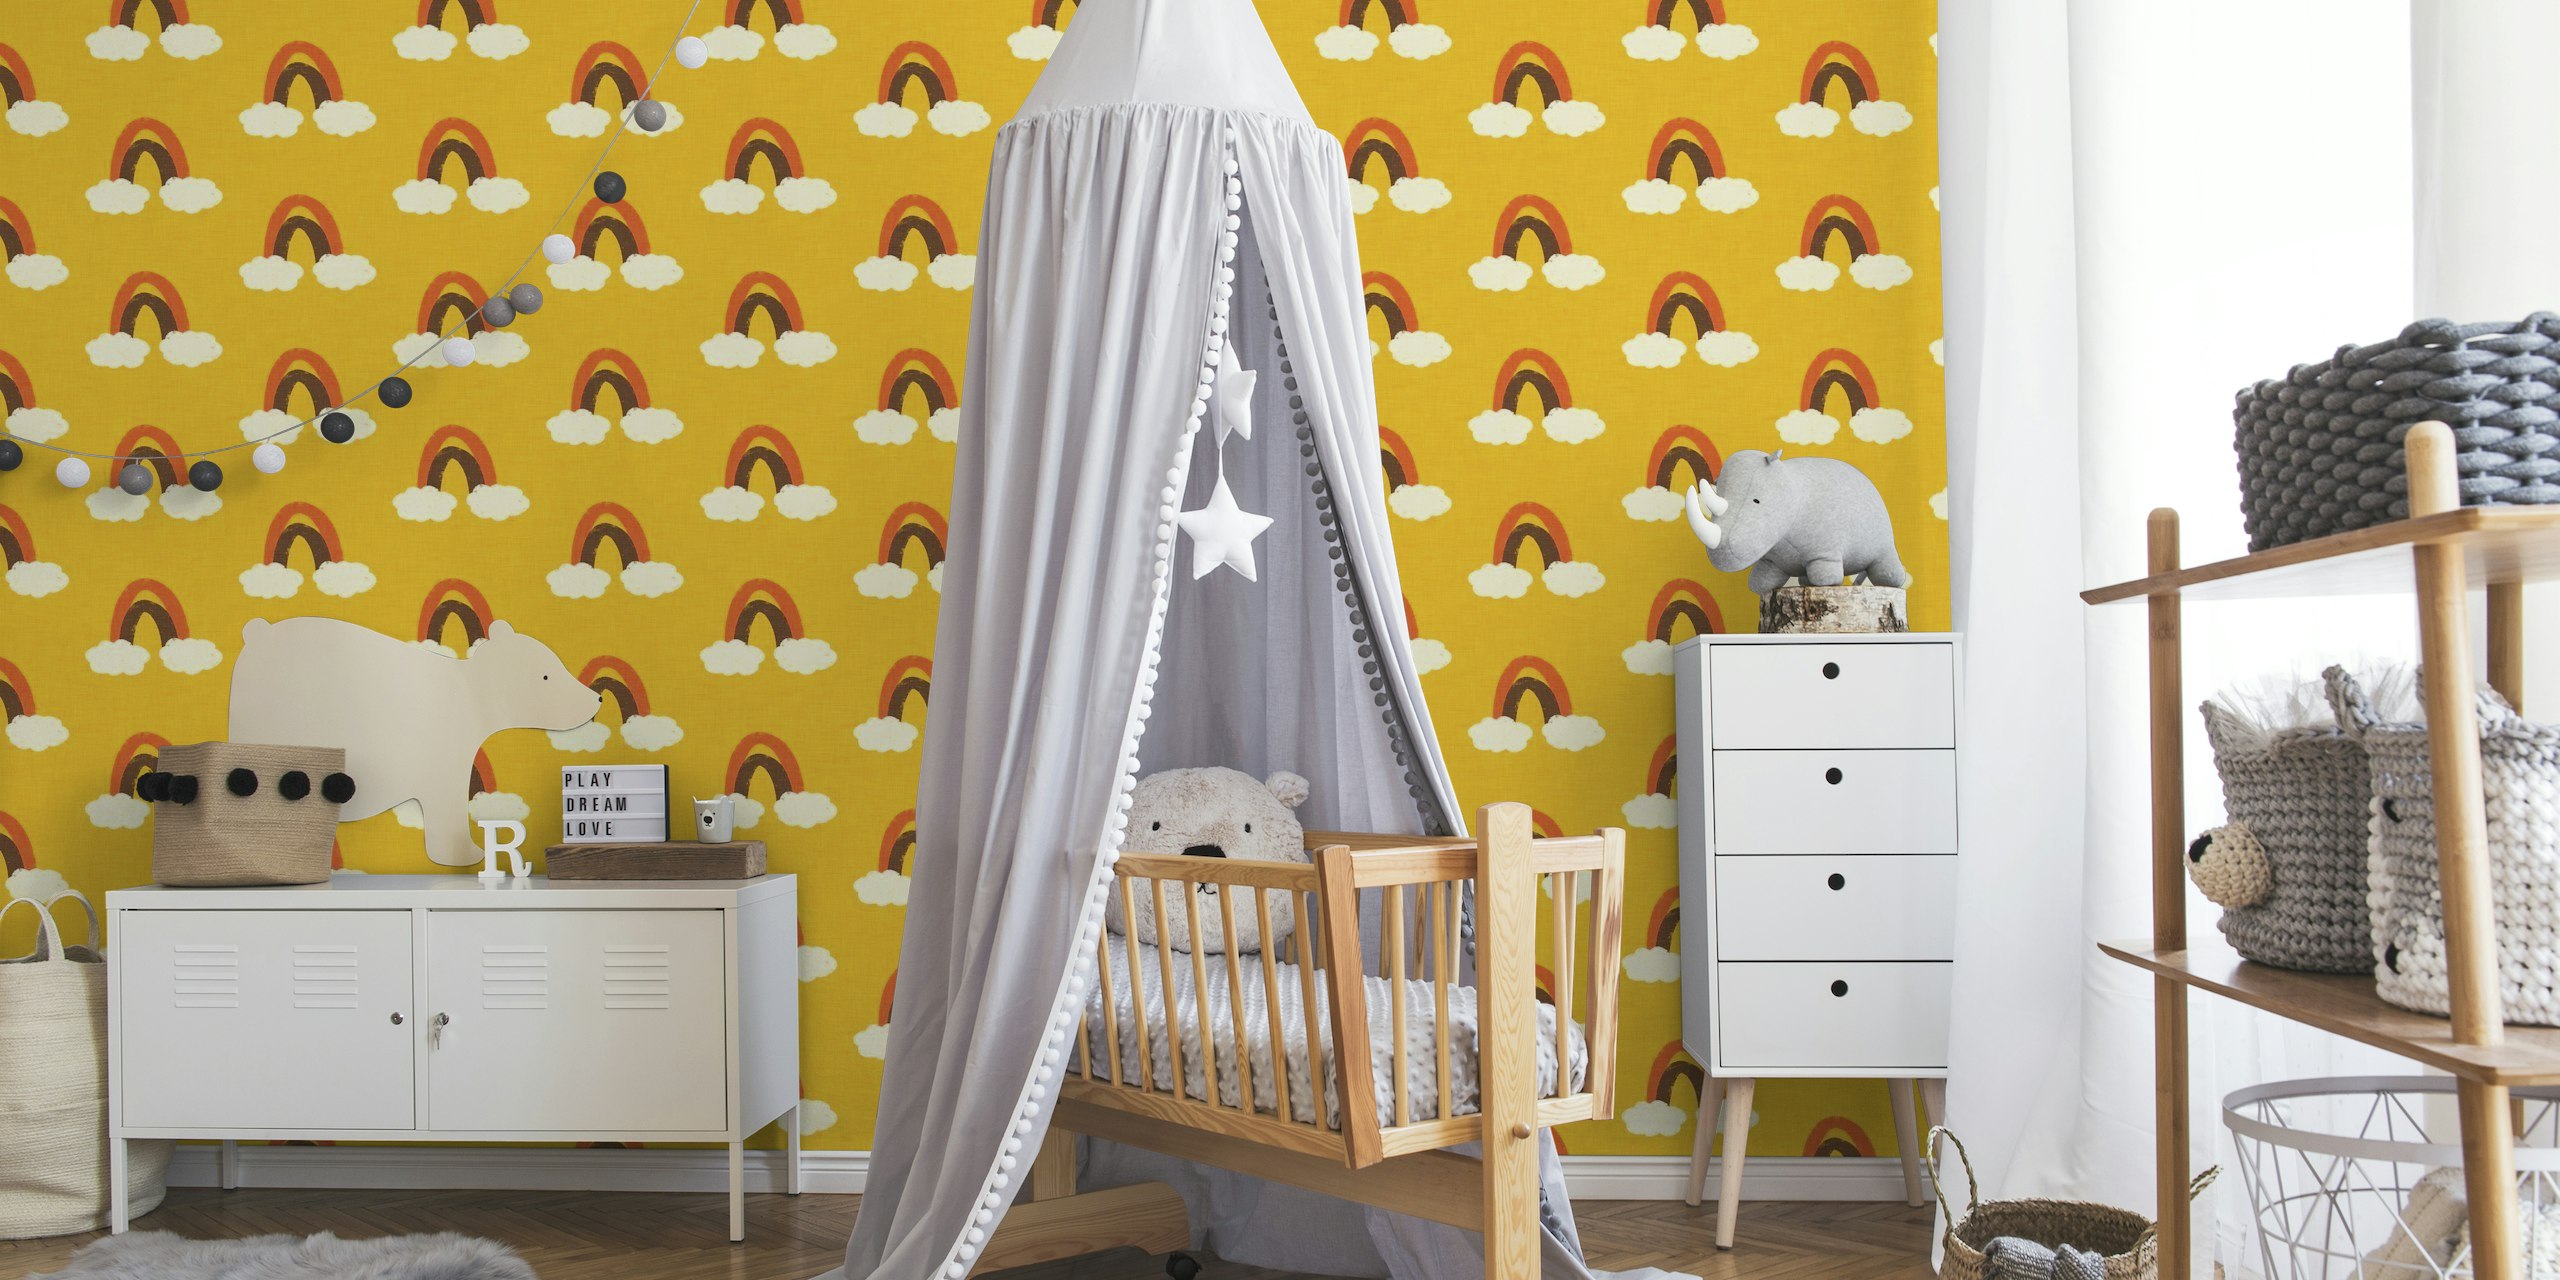 Groovy 70s Cute Rainbow with clouds Yellow wallpaper